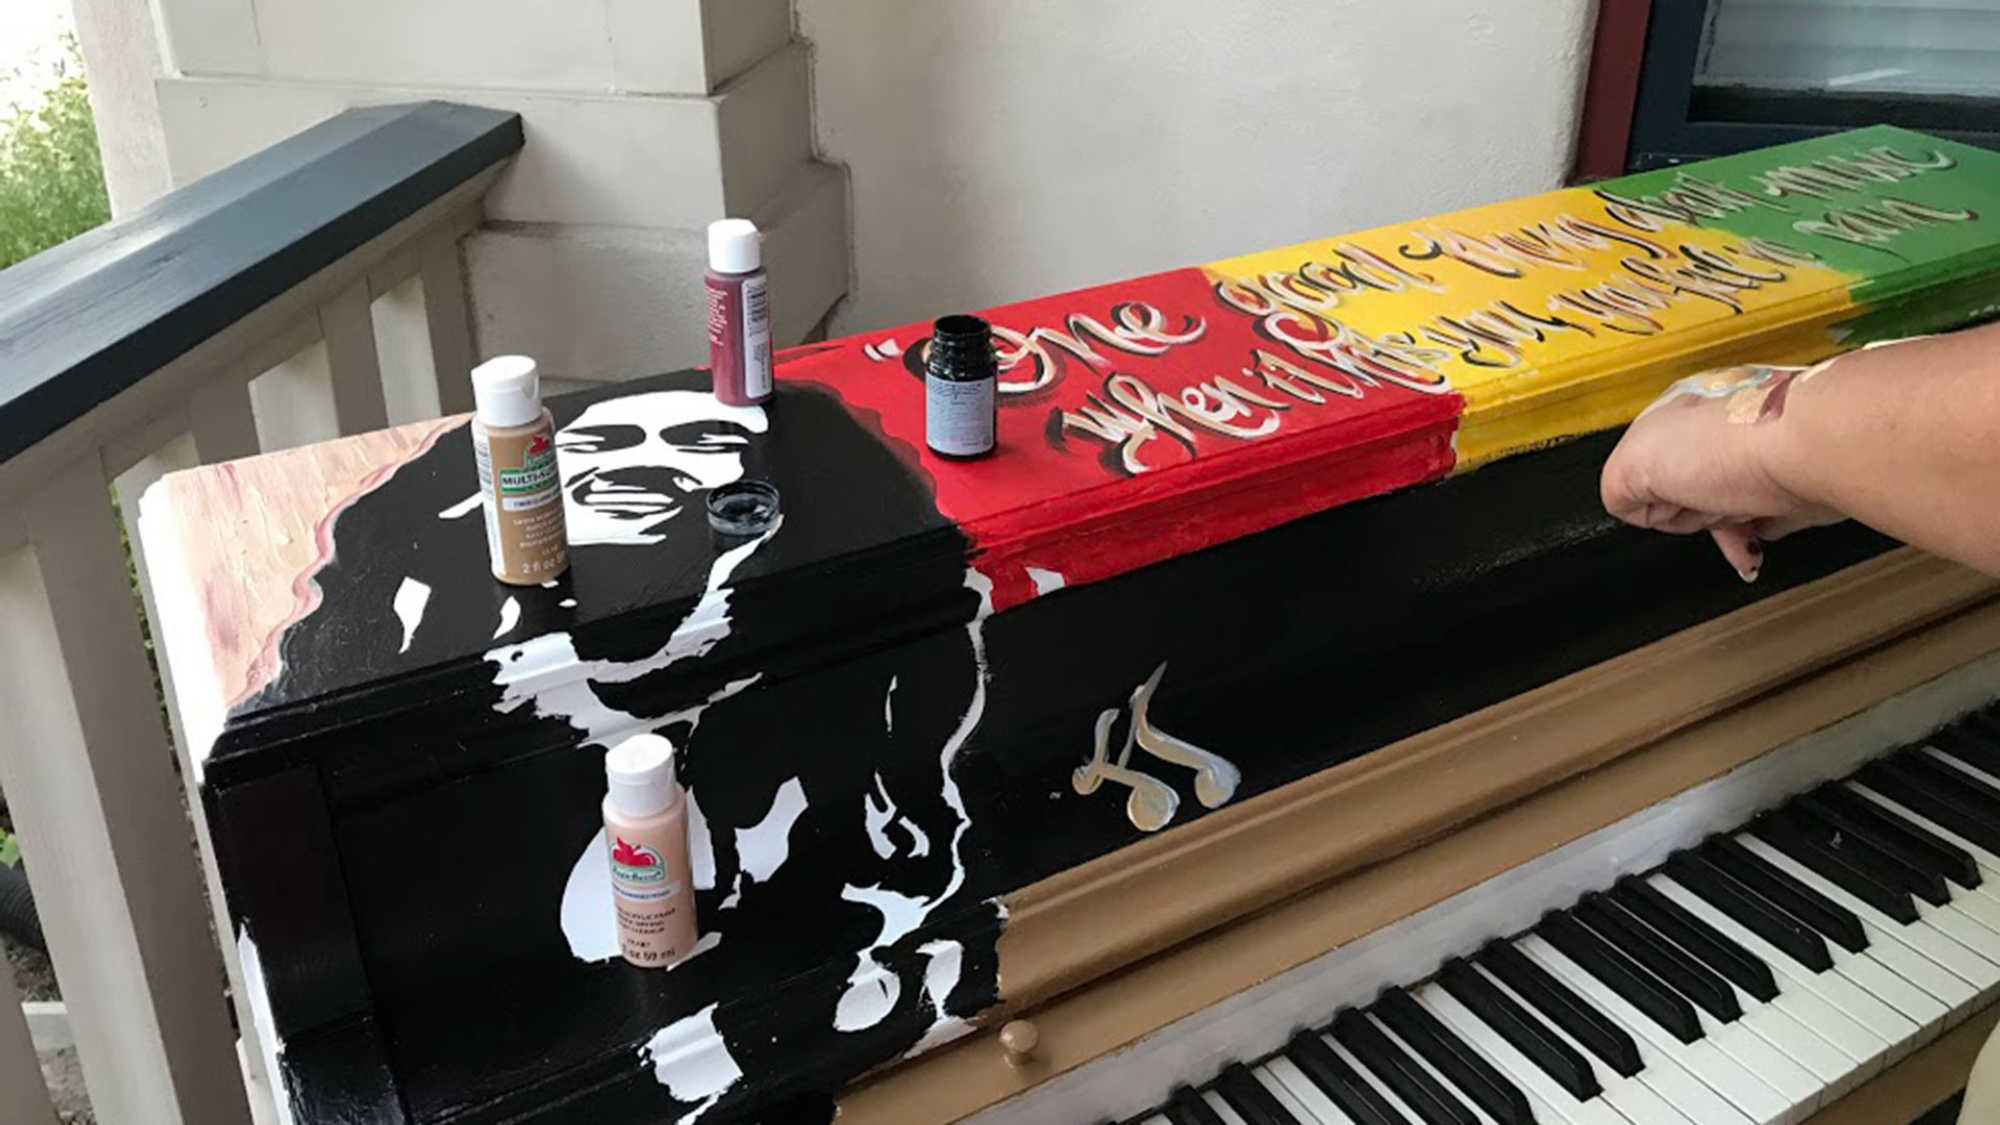 A piano being painted